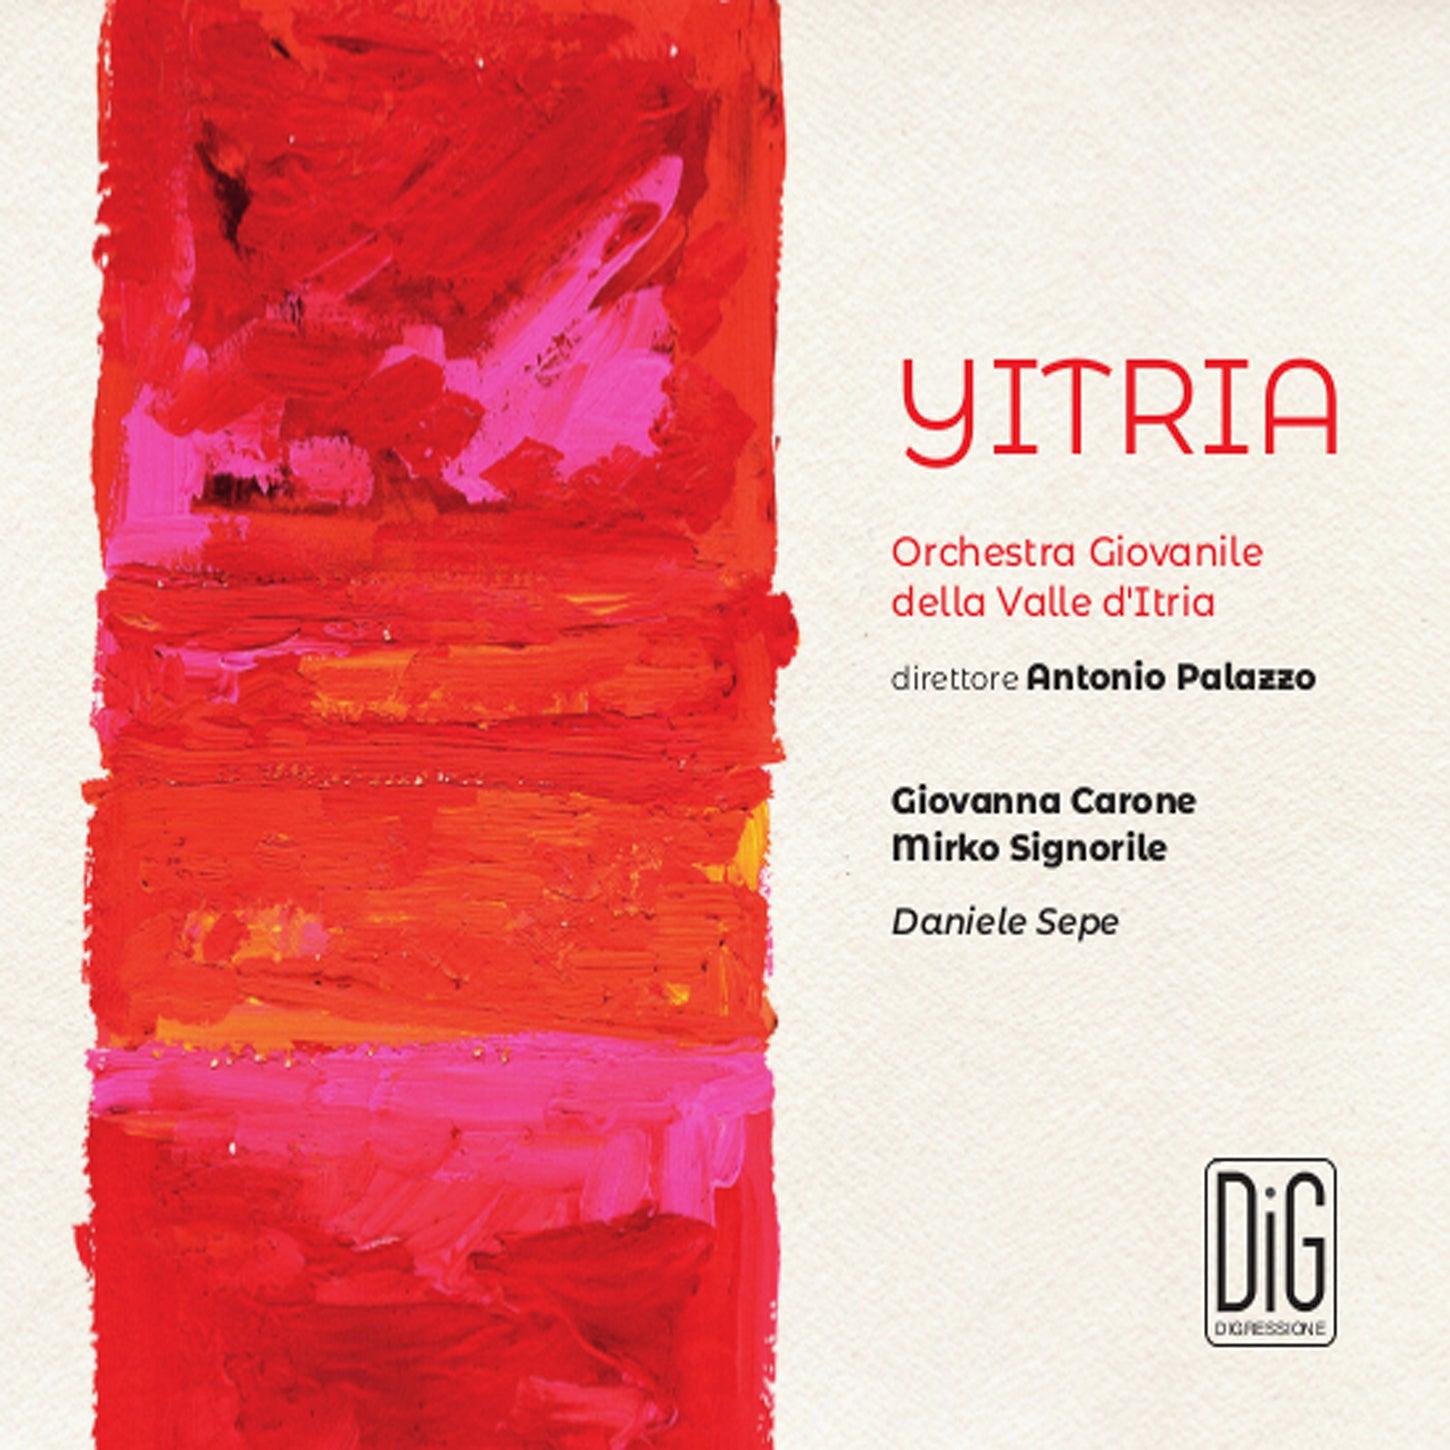 Yitria: Music of Yiddish and Itrian Traditions / Carone, Signorile, Palazzo, Orchestra Giovanile Valle d'Itria - ArkivMusic